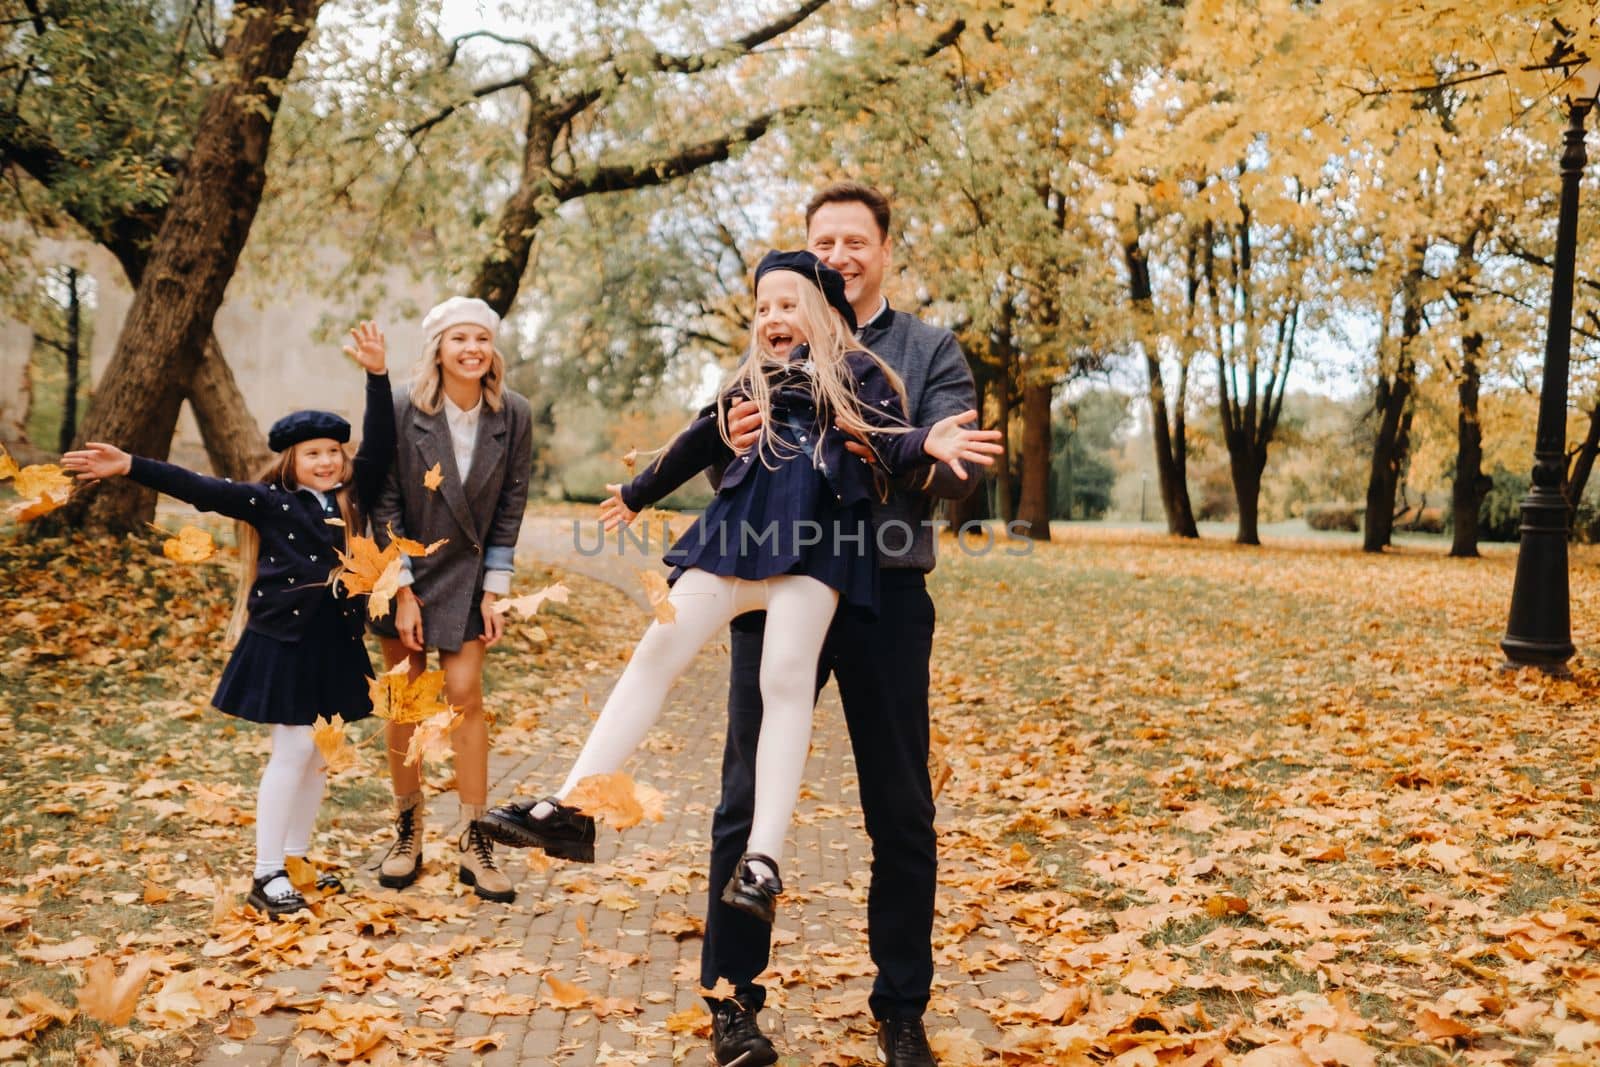 A large family walks in the park in the fall. Happy people in the autumn park.